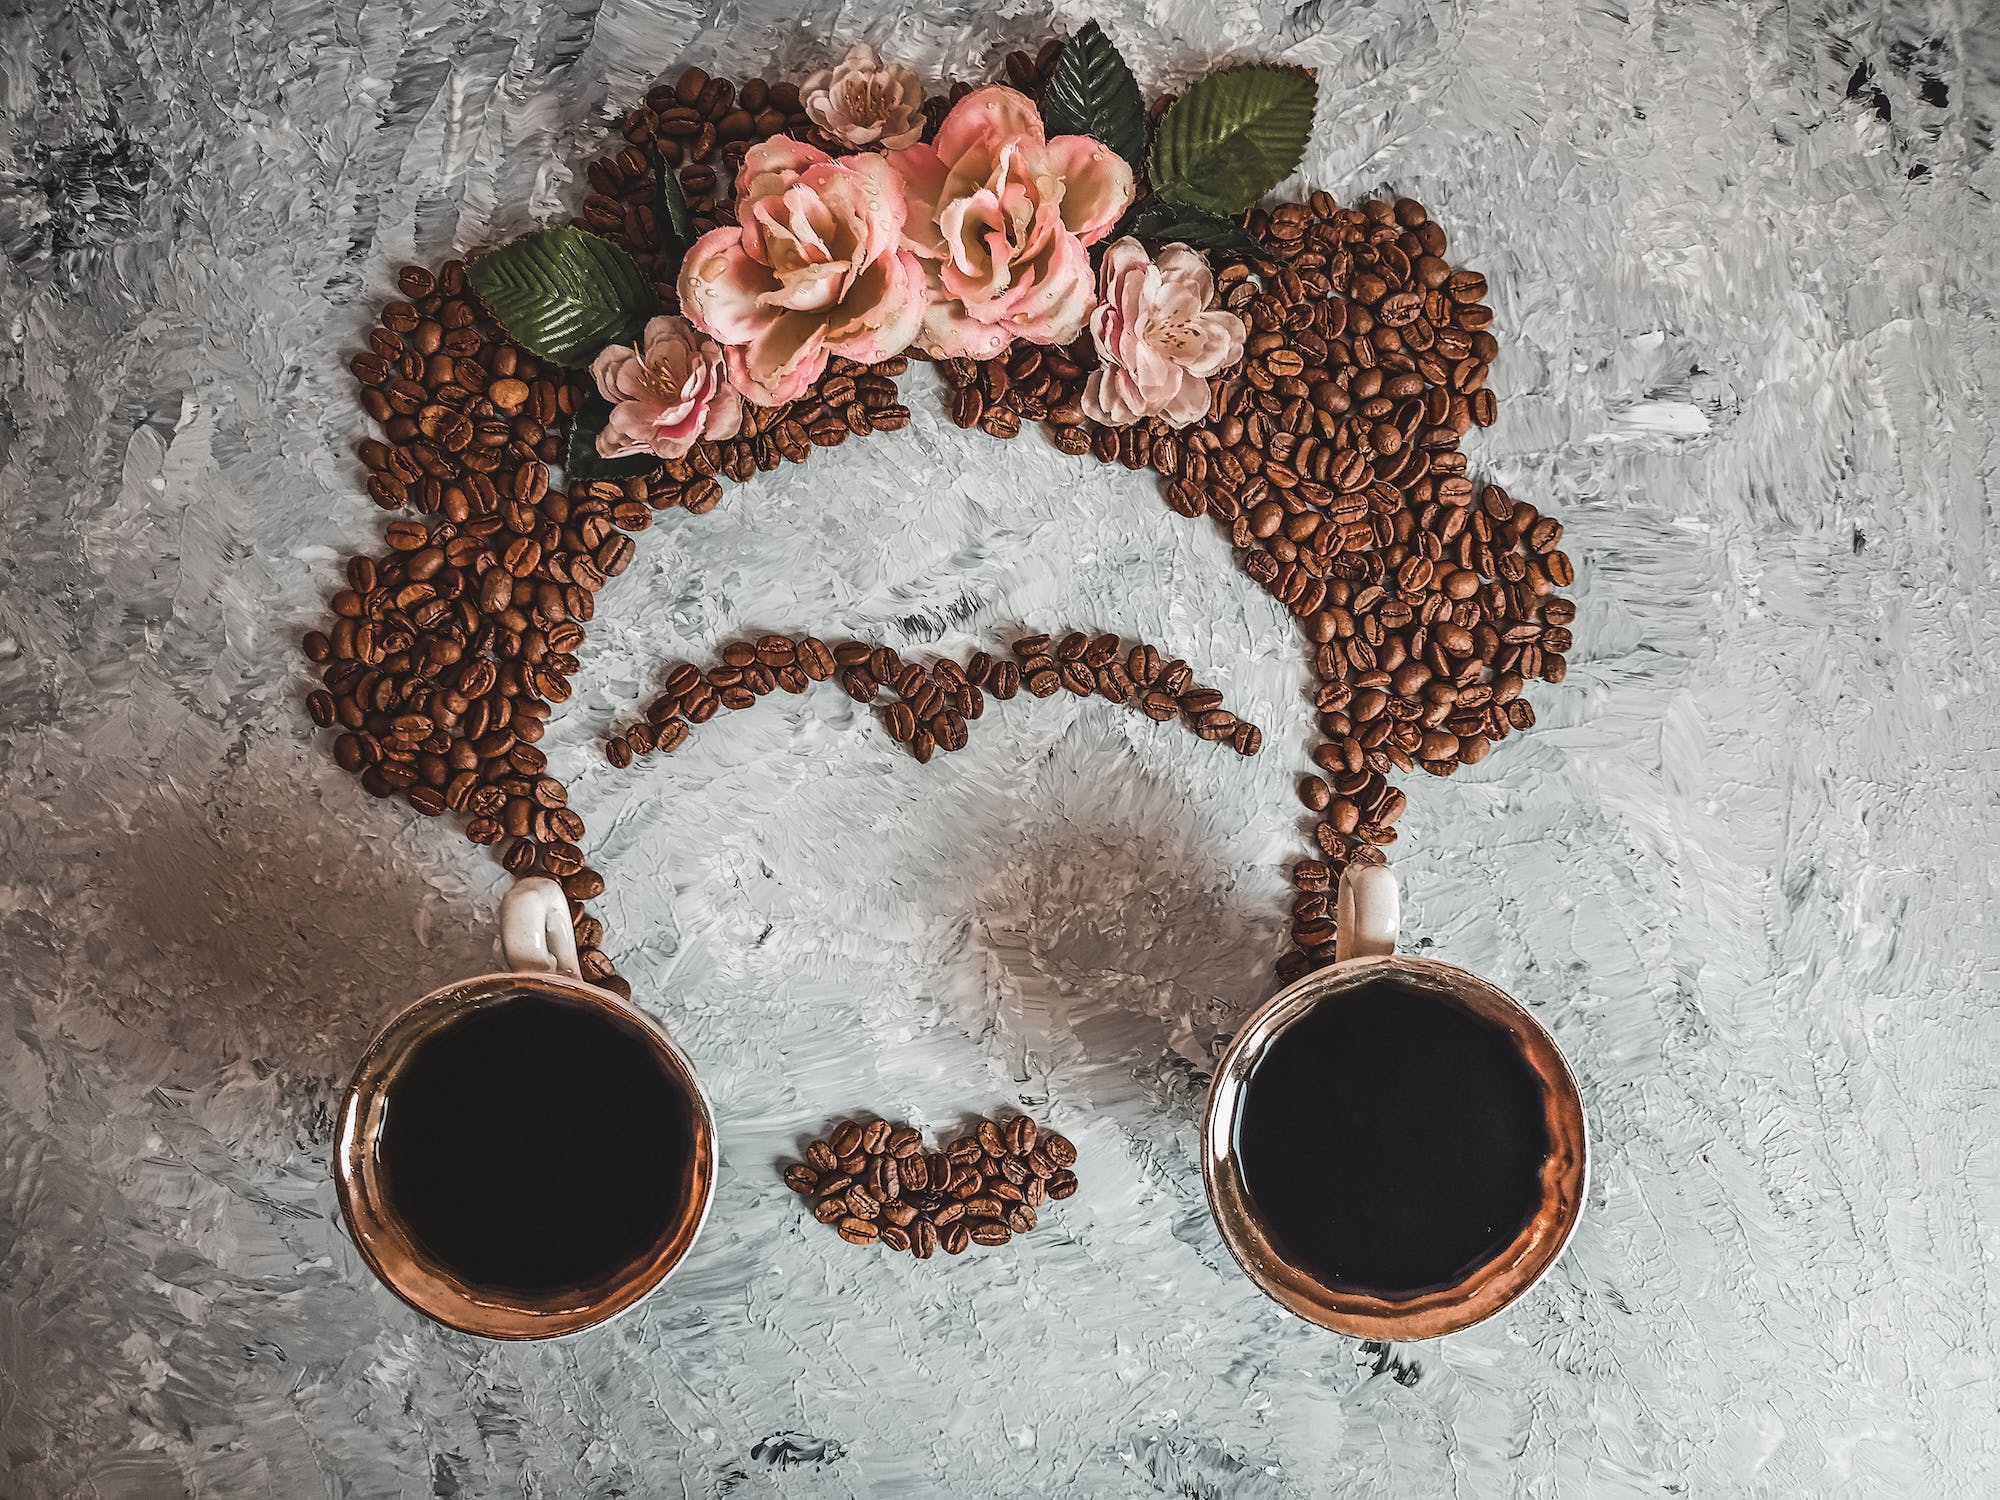 Photo by Işıl Coffee Art with Brown Coffee Beans on Gray Surface - pexels.com